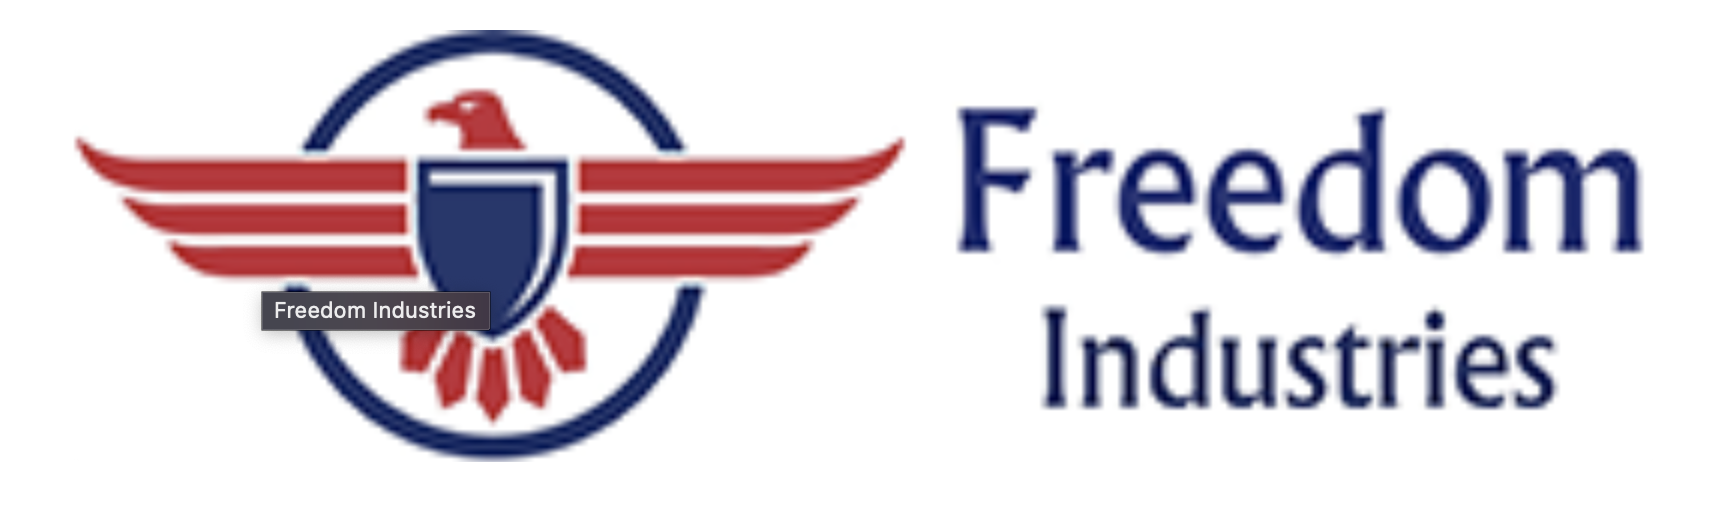 Freedom Industries customer mobile forms case study logo